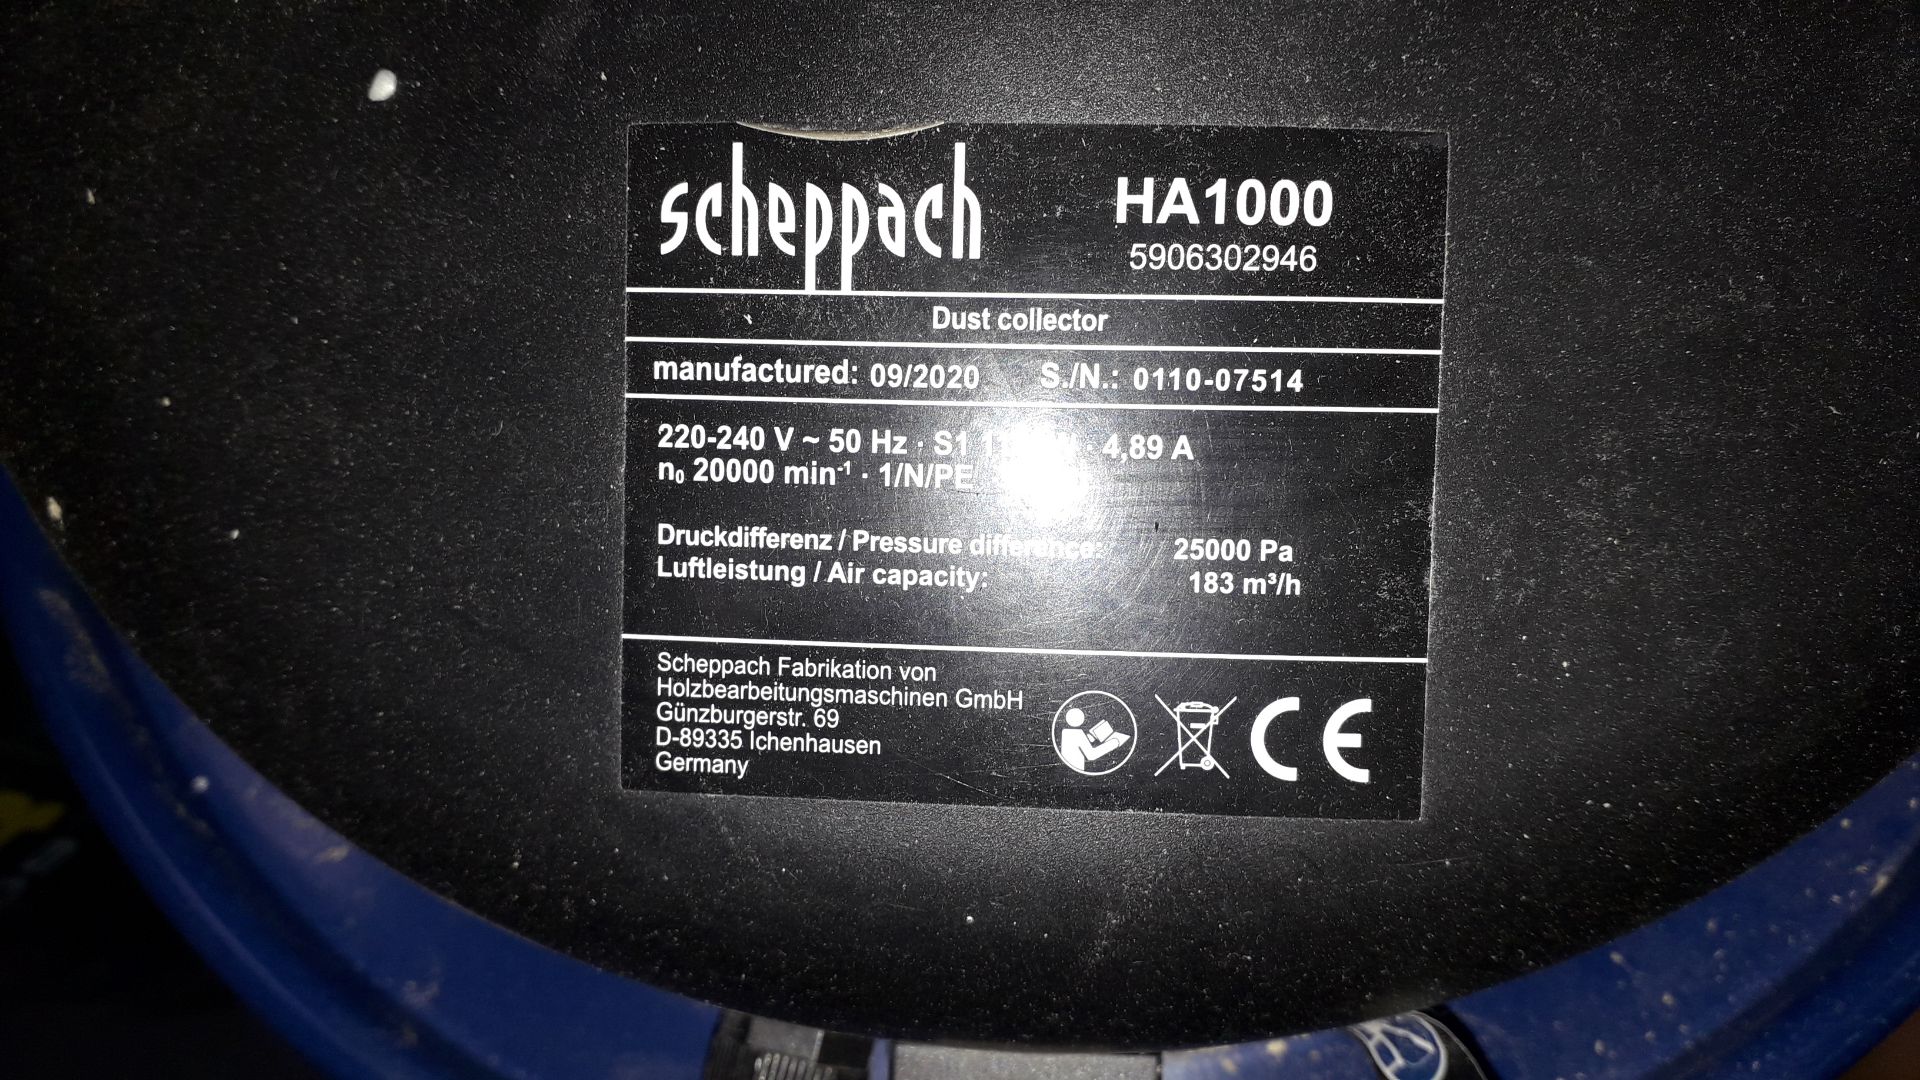 Record Power DX1000 Fine Filter 45Ltr Dust Extractor and Scheppach HA1000 50Ltr Dust Collector - Image 5 of 5